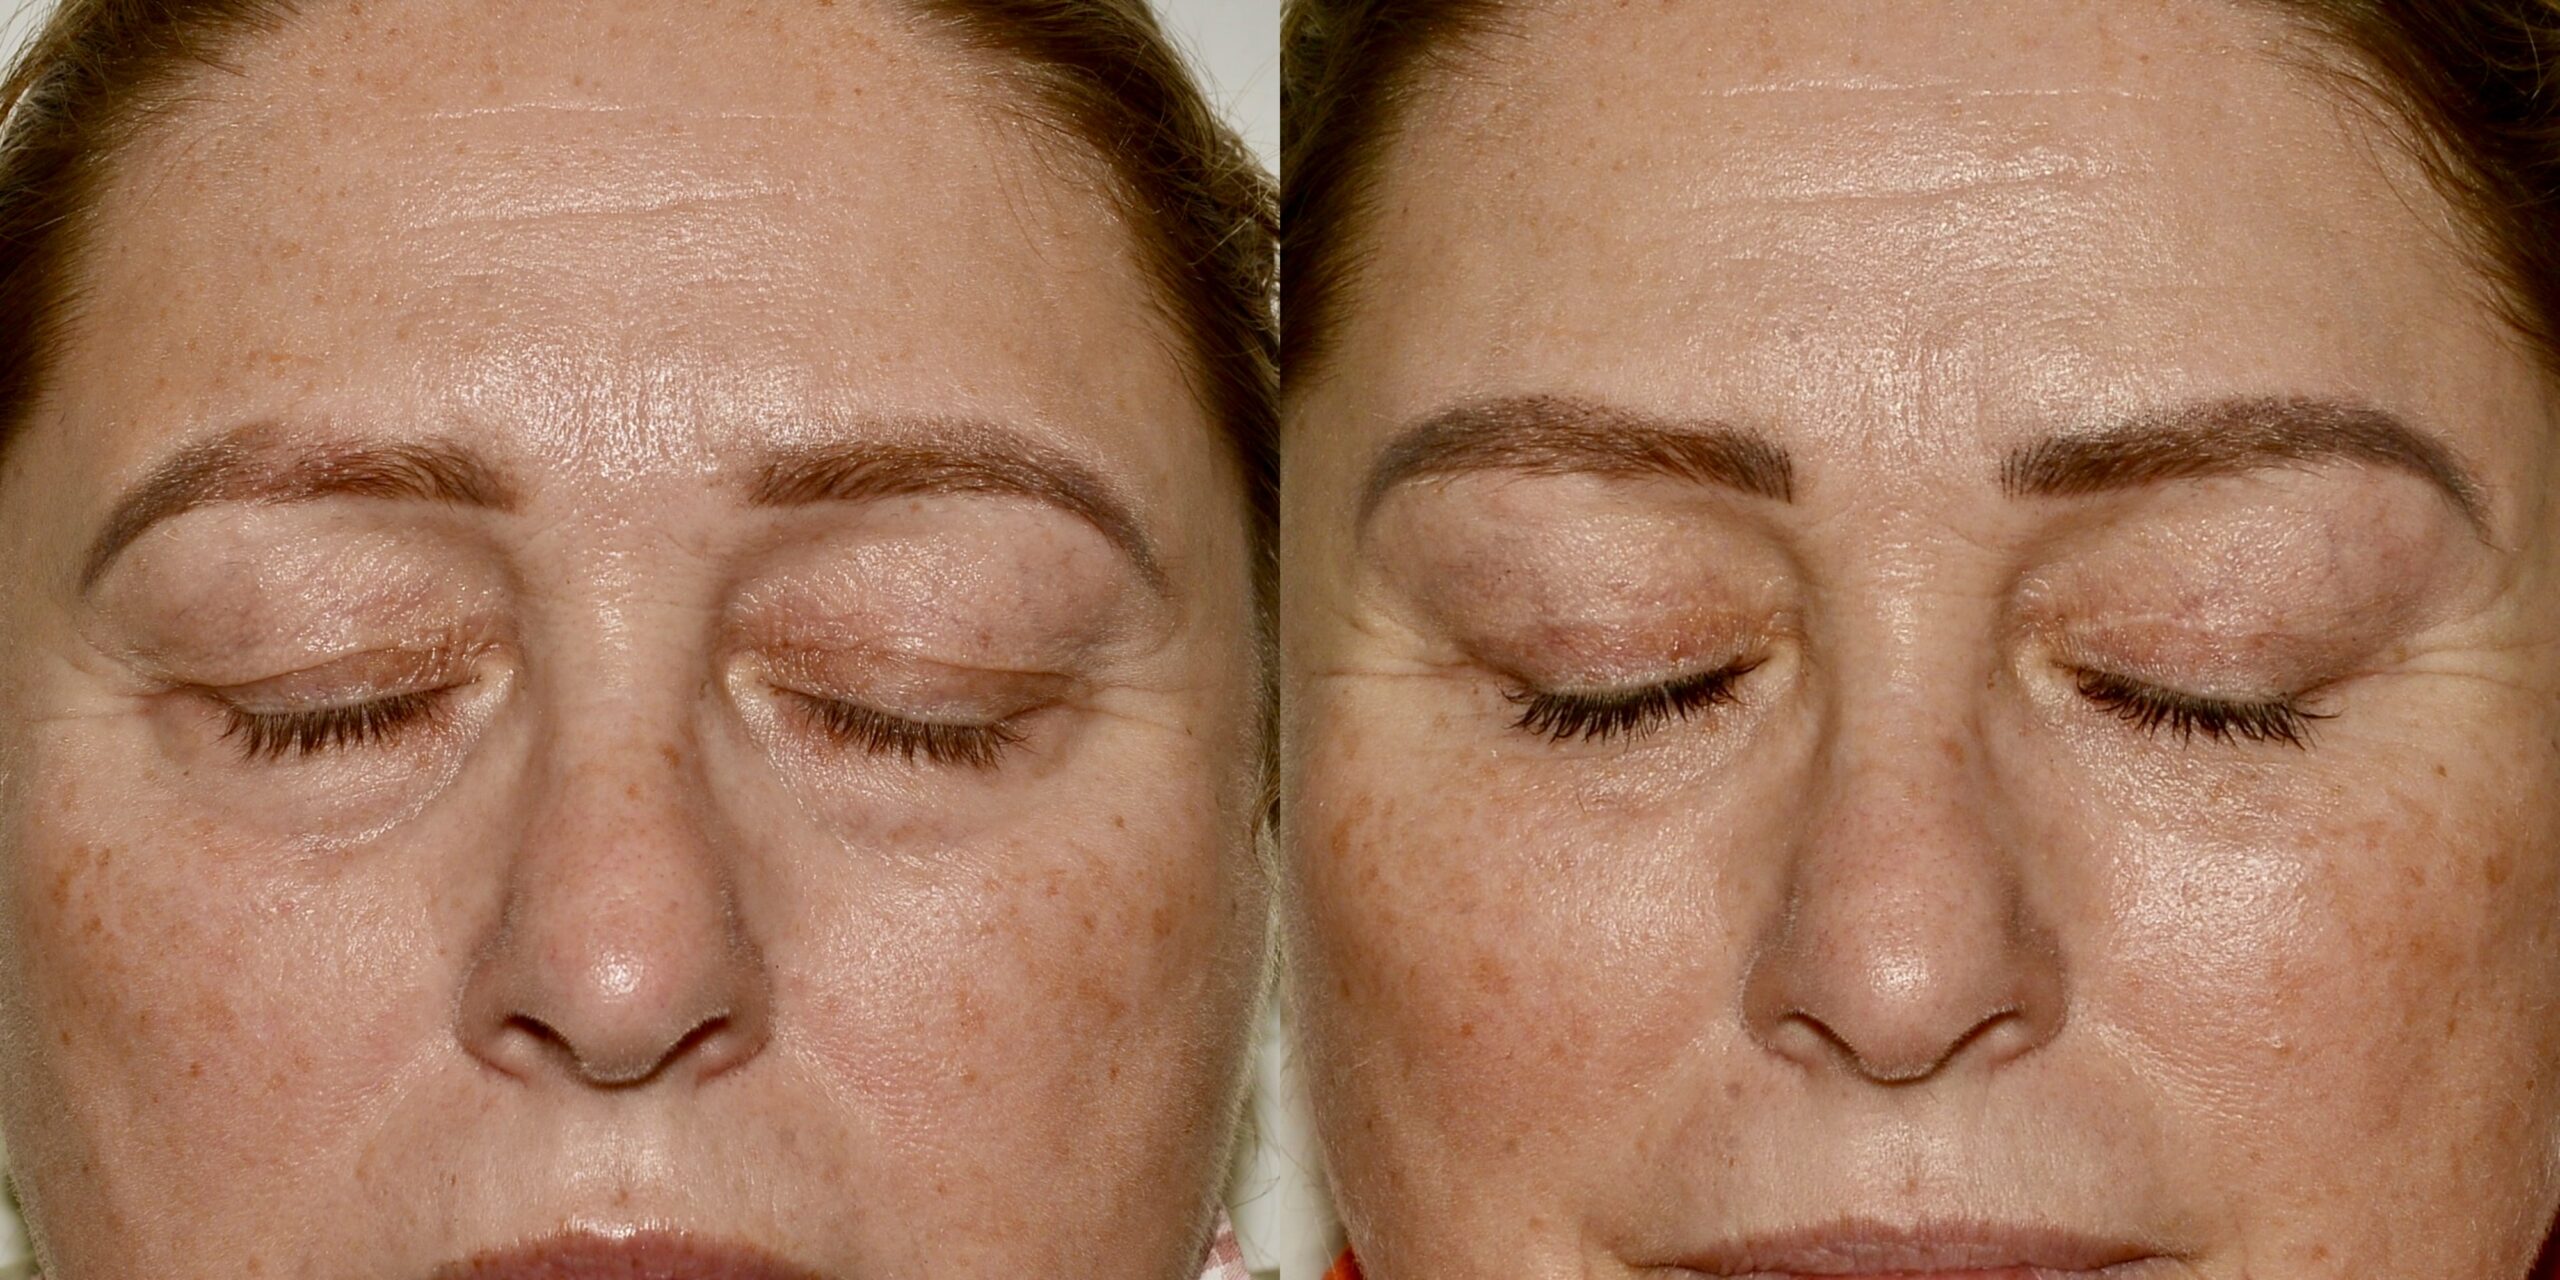 Direct brow with eyelid surgery